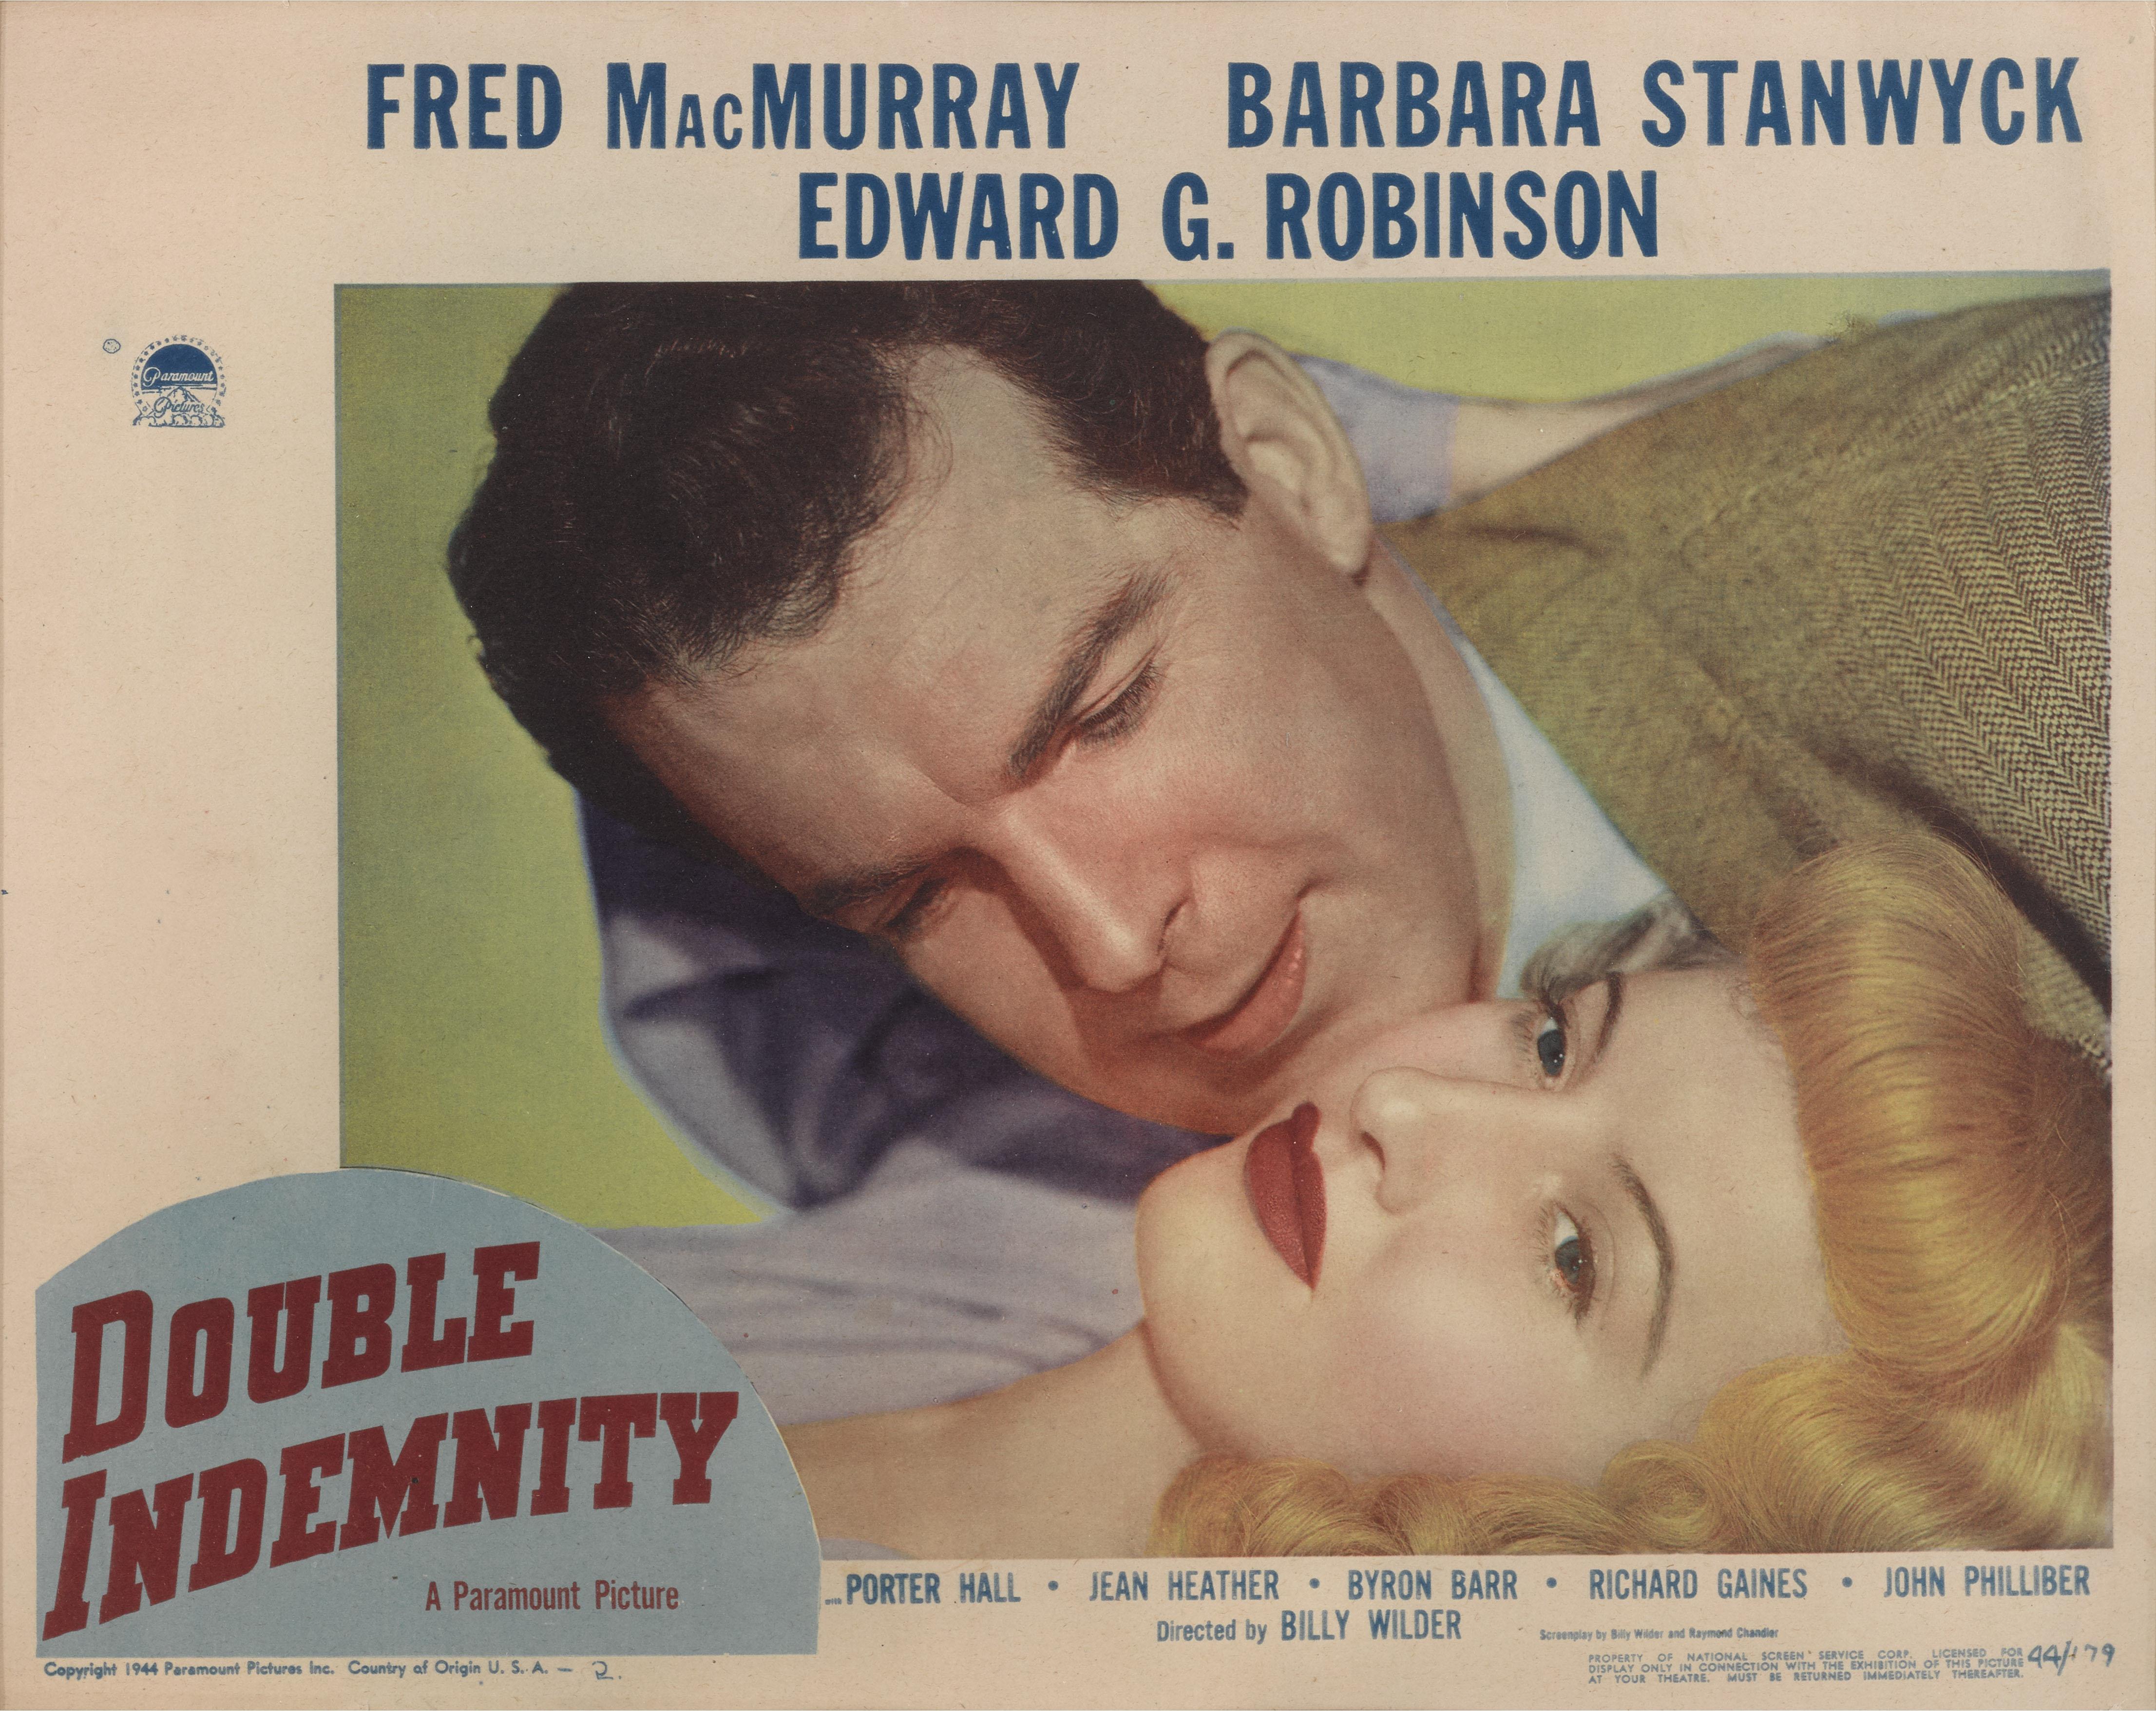 Original US lobby card for the 1944 Film Noir double Indemnity.
This film starred Fred MacMurray and Barbara Stanwyck.
The film was directed by Billy Wilder.
This lobby card is conservation framed with UV plexiglass in an Obeche wood frame with